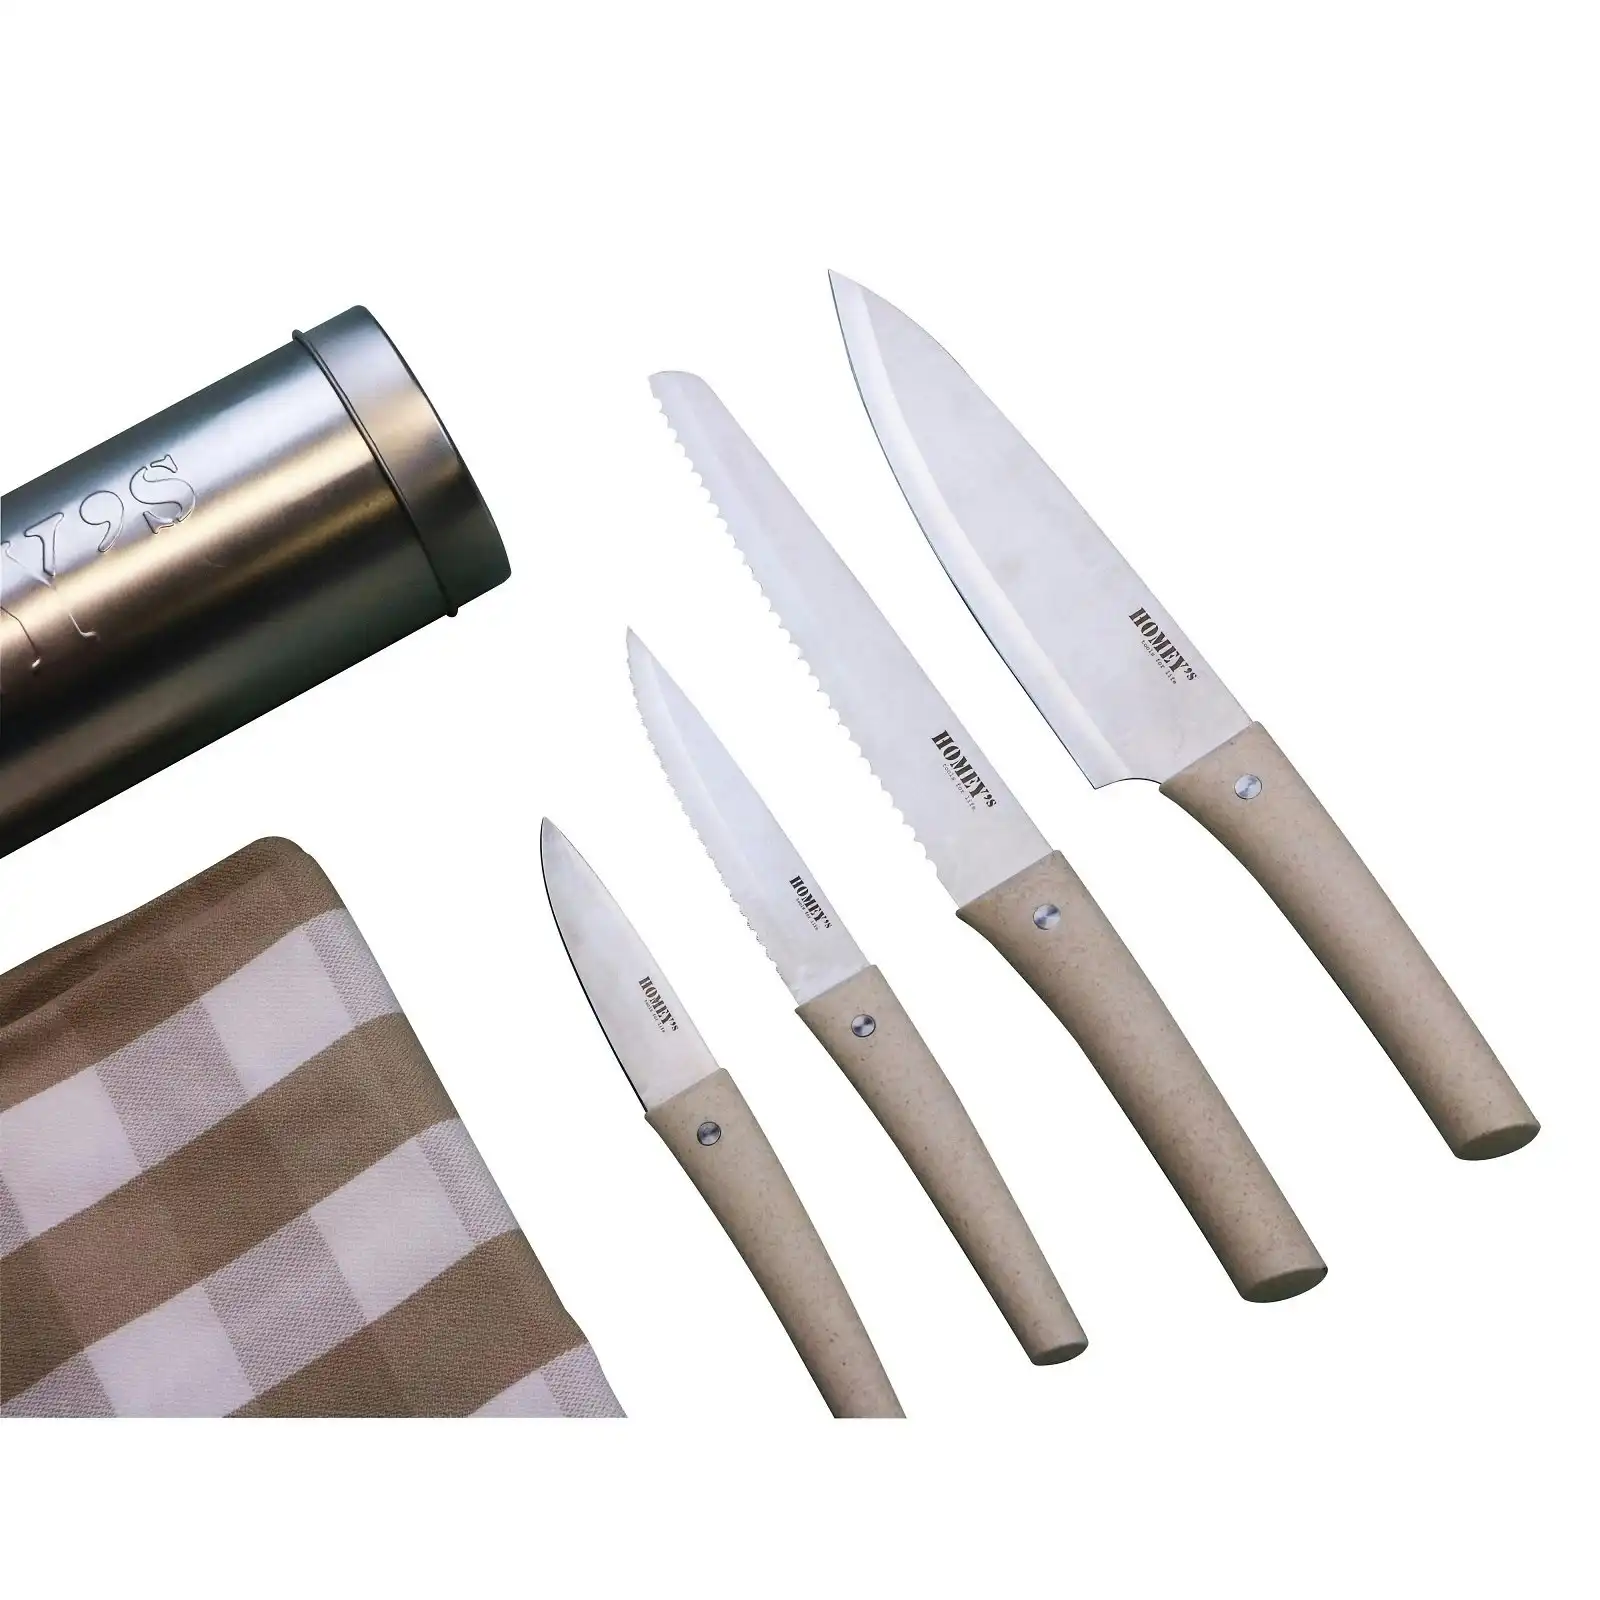 Homeys Tools For Life Nodigh 6 Piece Knife Set In Tin